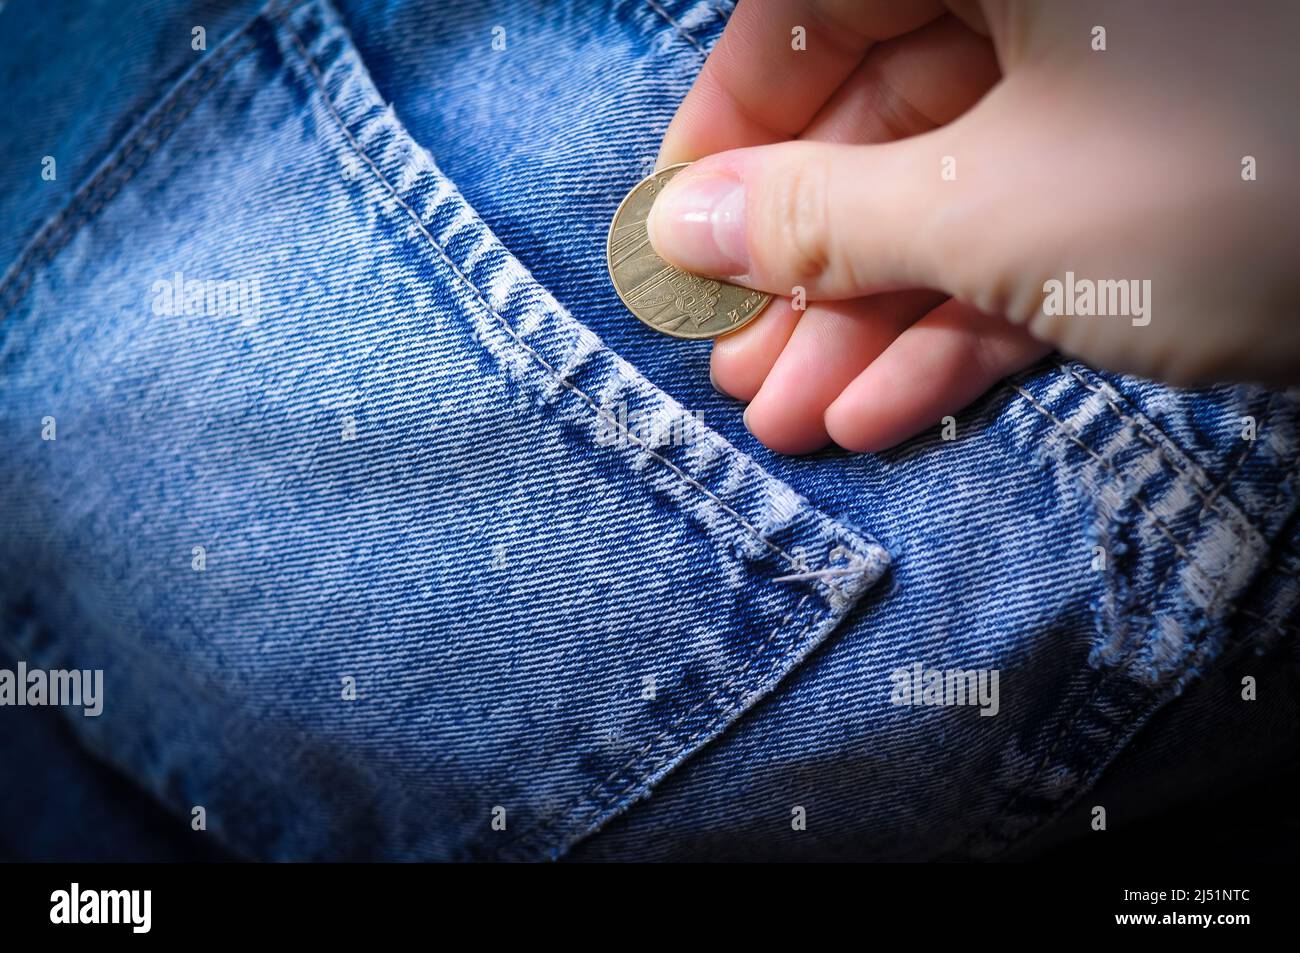 Hands Pants Pocket Without Money Stock Photo 1173369598